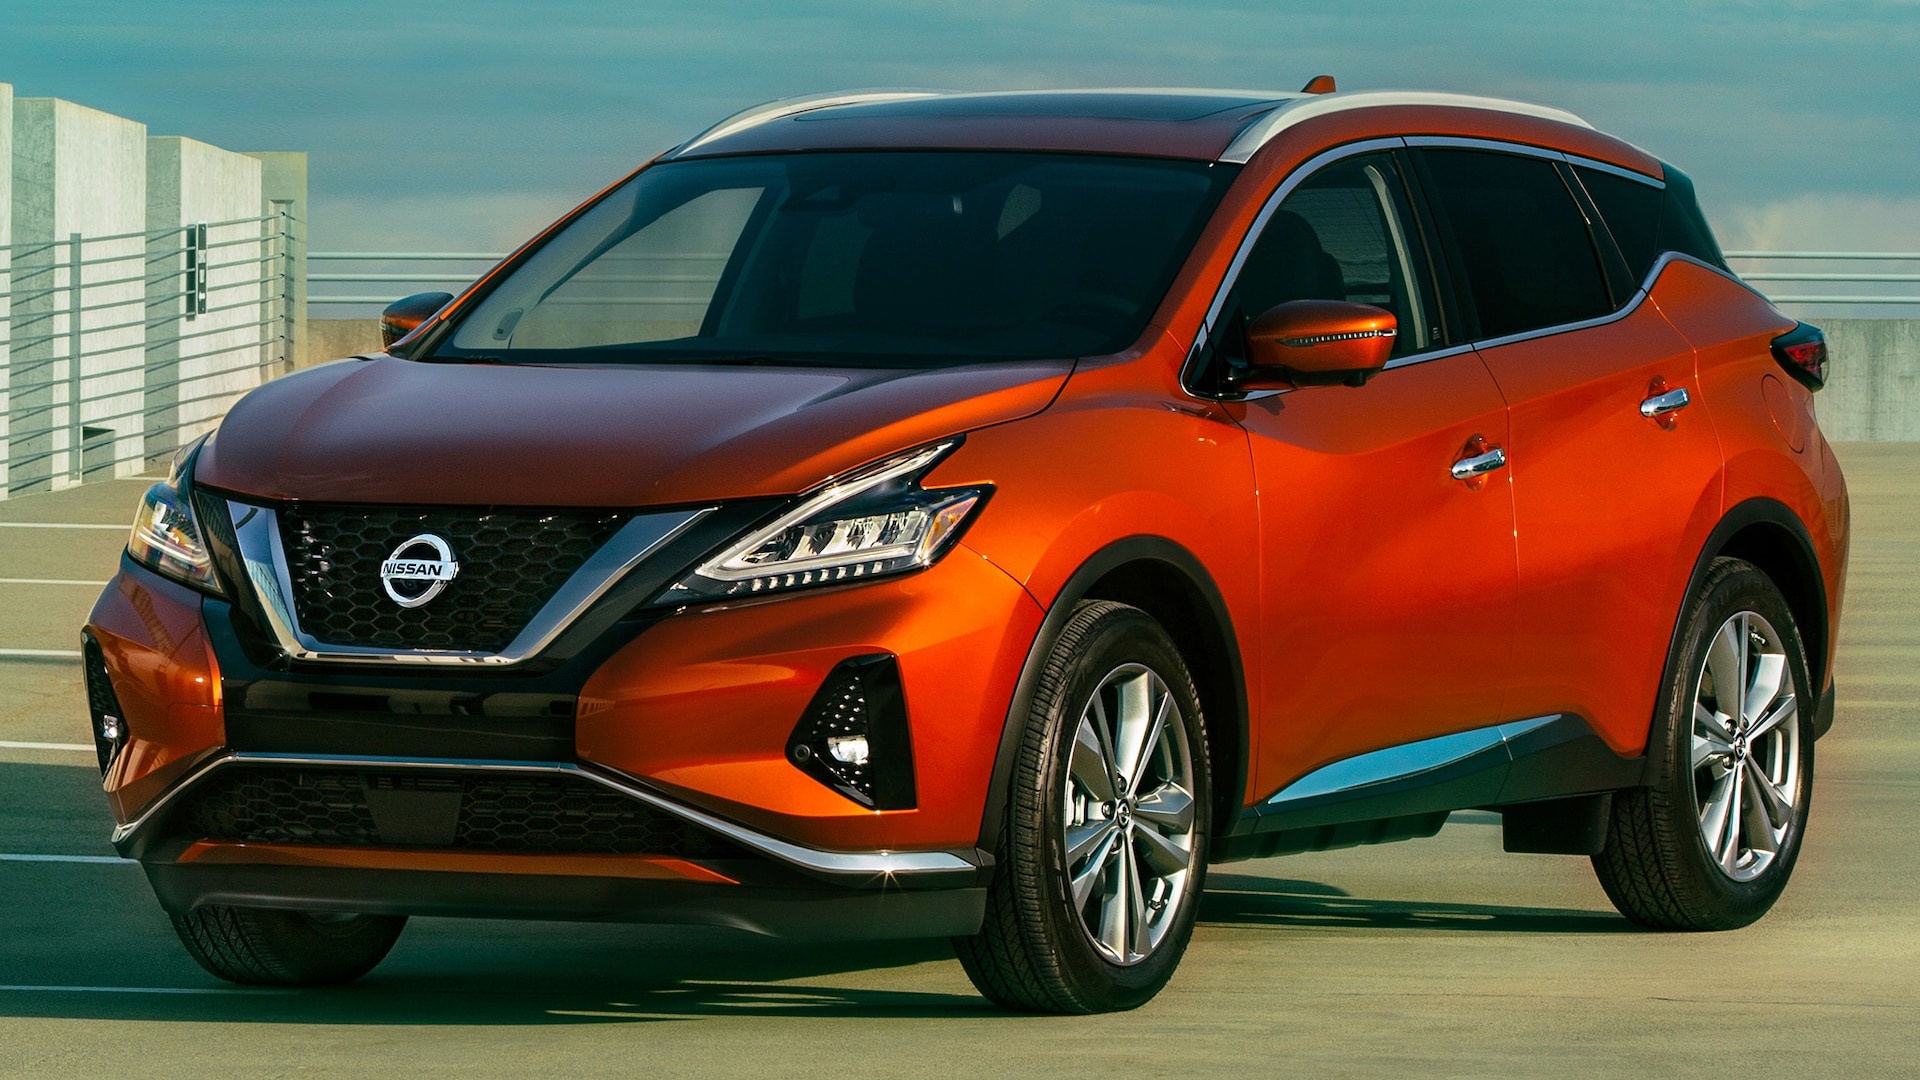 Nissan Murano, Stylish crossover, Spacious interior, Advanced safety features, 1920x1080 Full HD Desktop